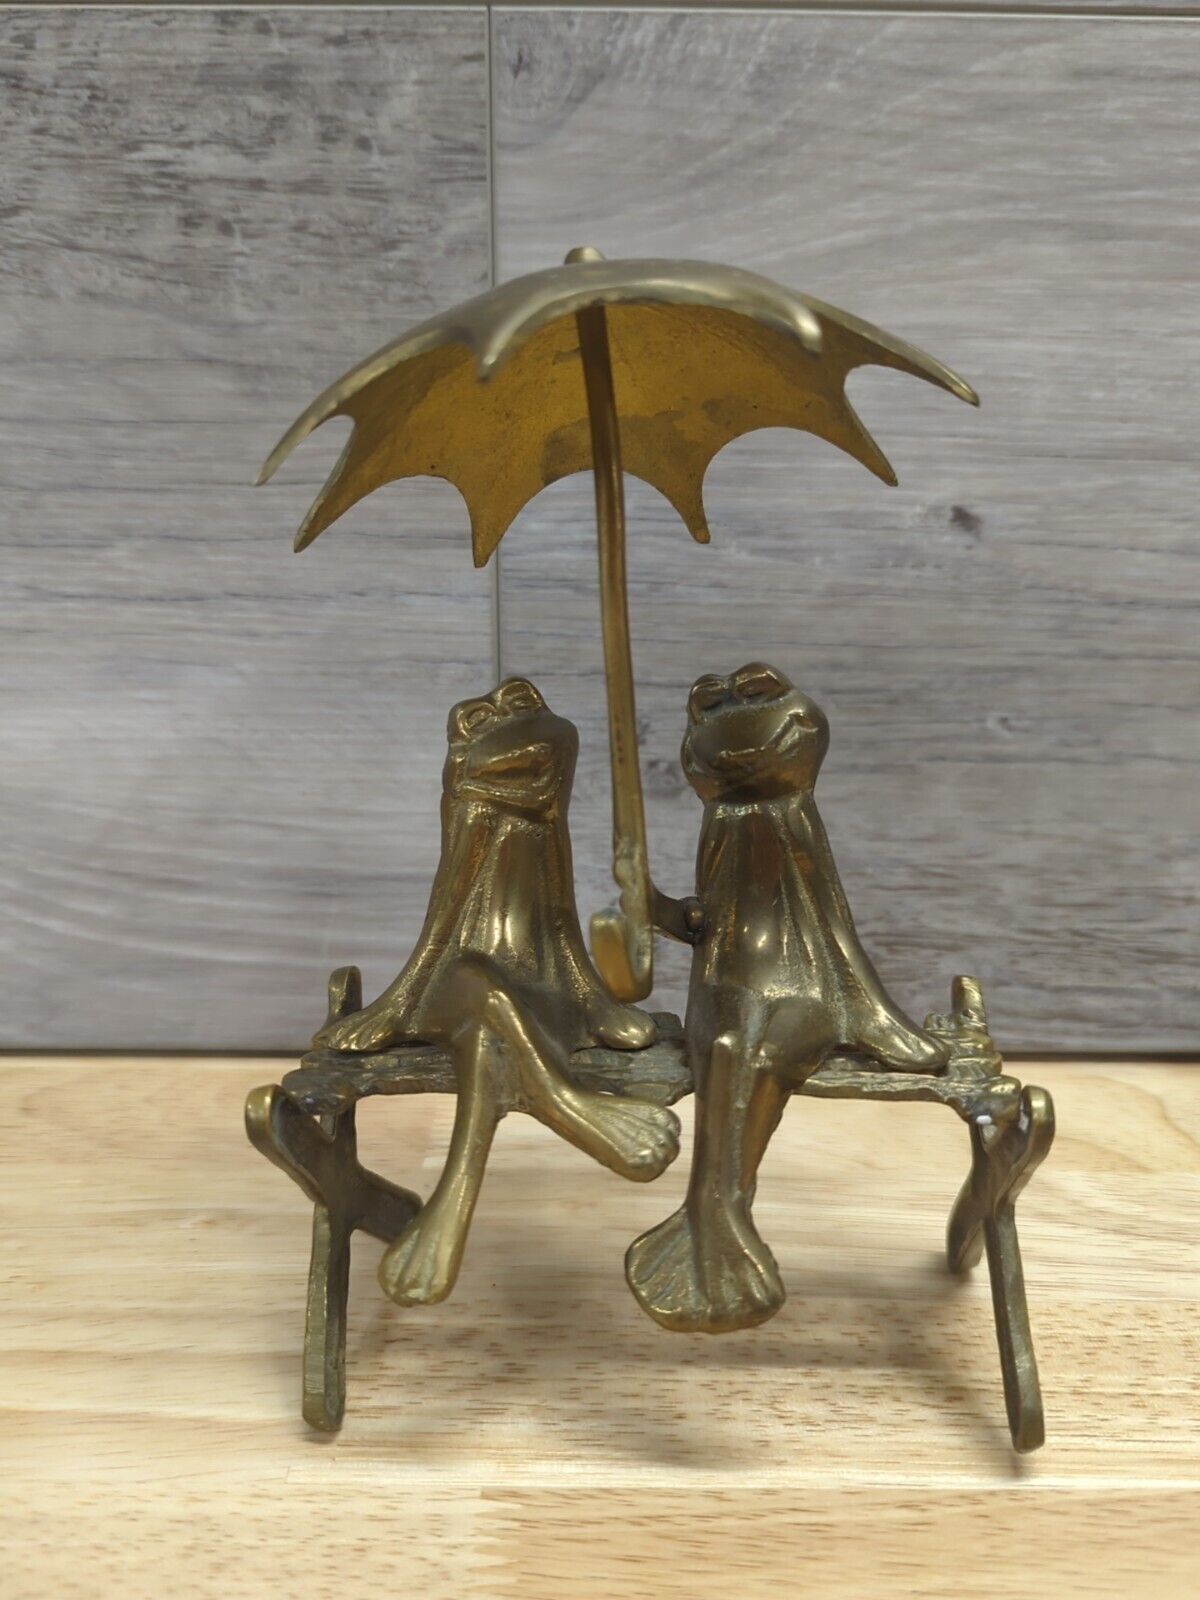 Vintage Brass Frogs On Bench With Umbrella